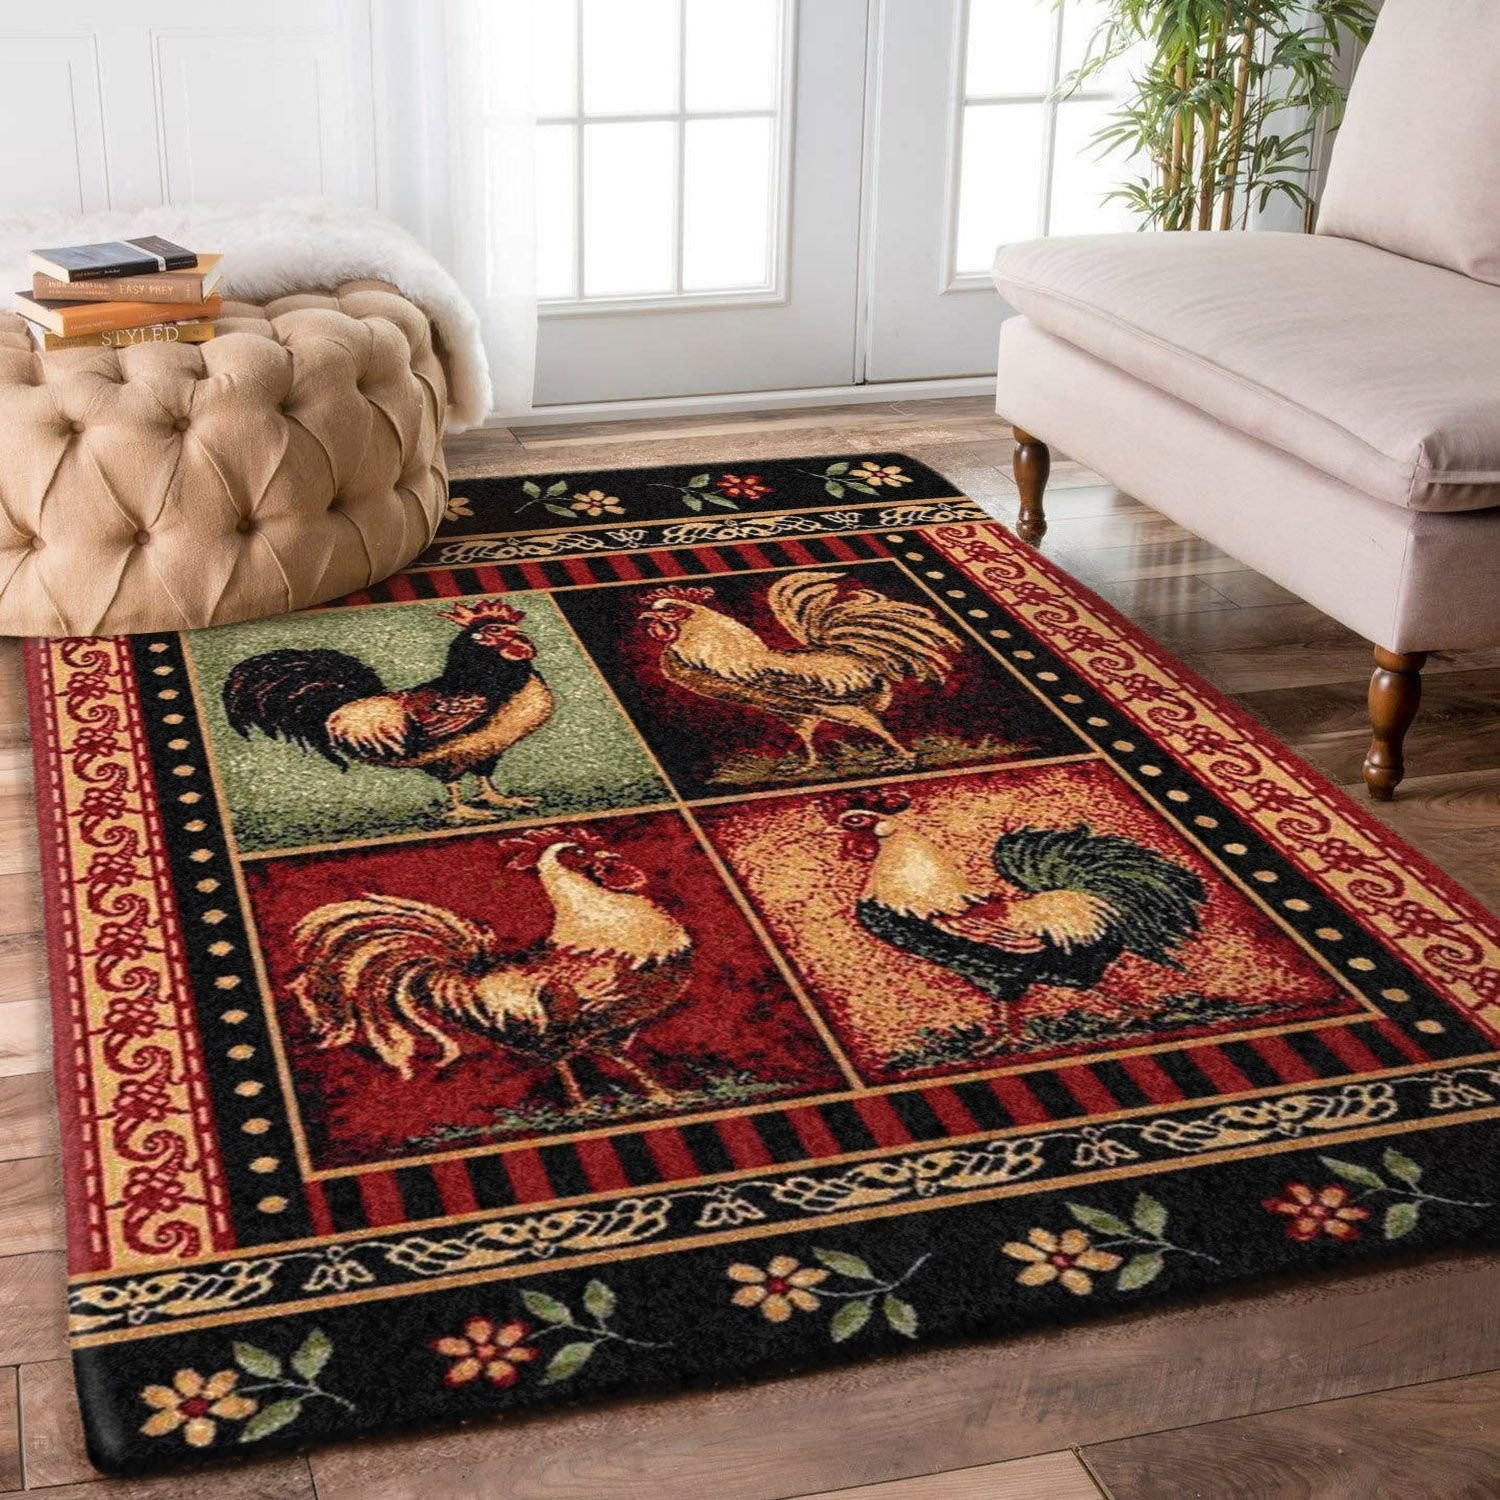 Rooster Rugs Home Decor PAN